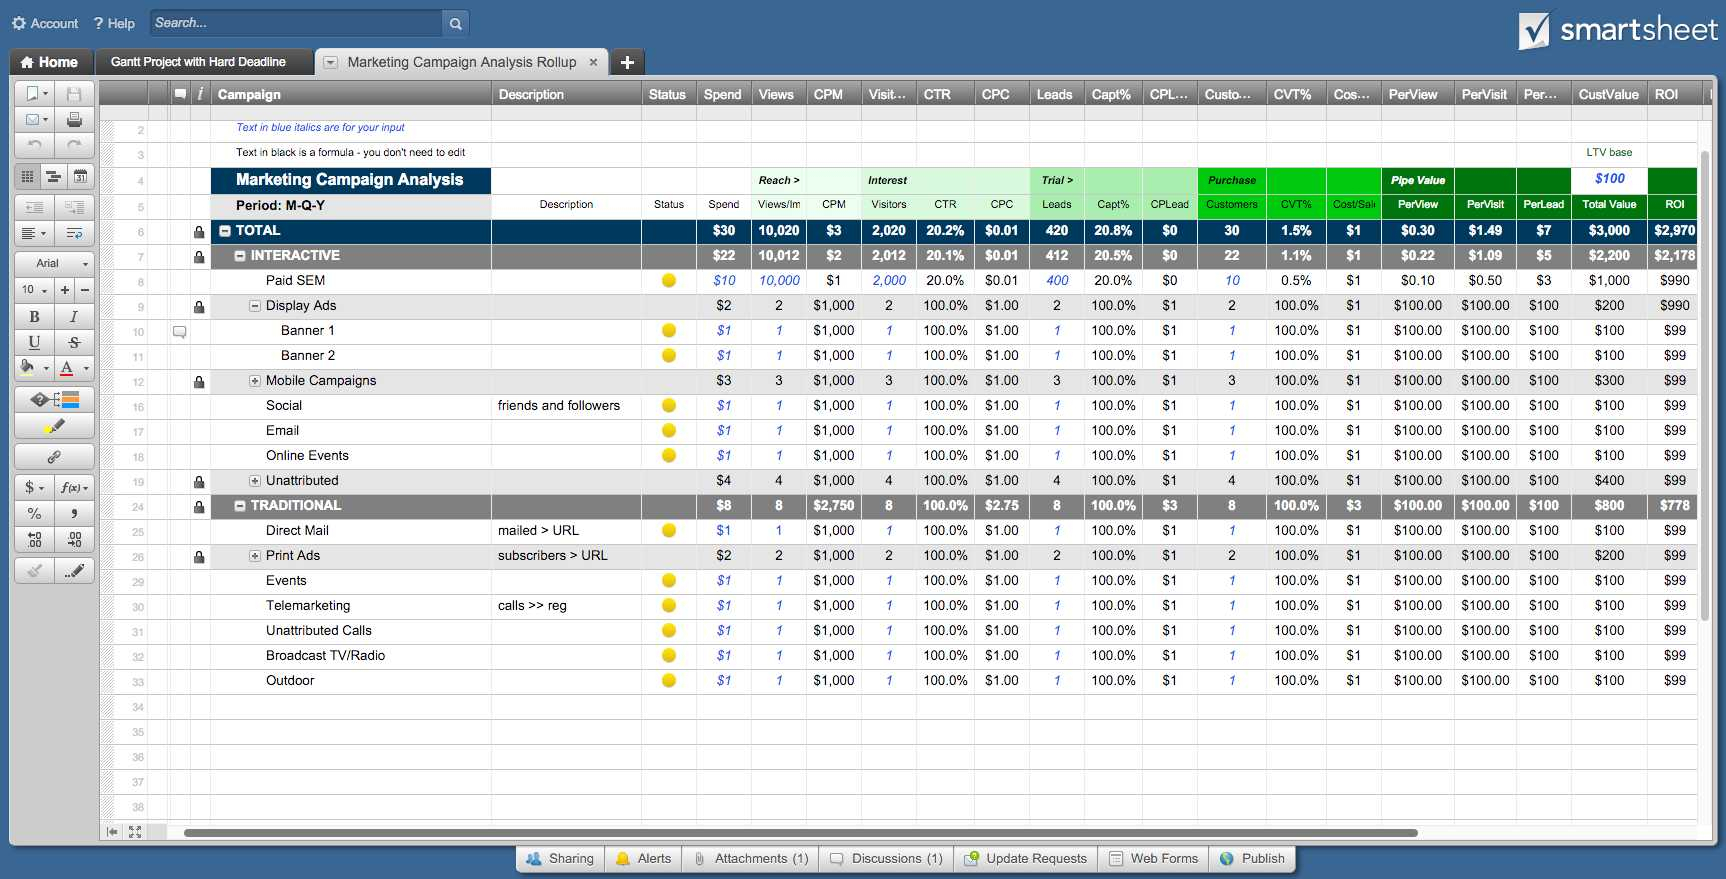 Contract Management Excel Spreadsheet | Sosfuer Spreadsheet Throughout Contract Management Excel Spreadsheet